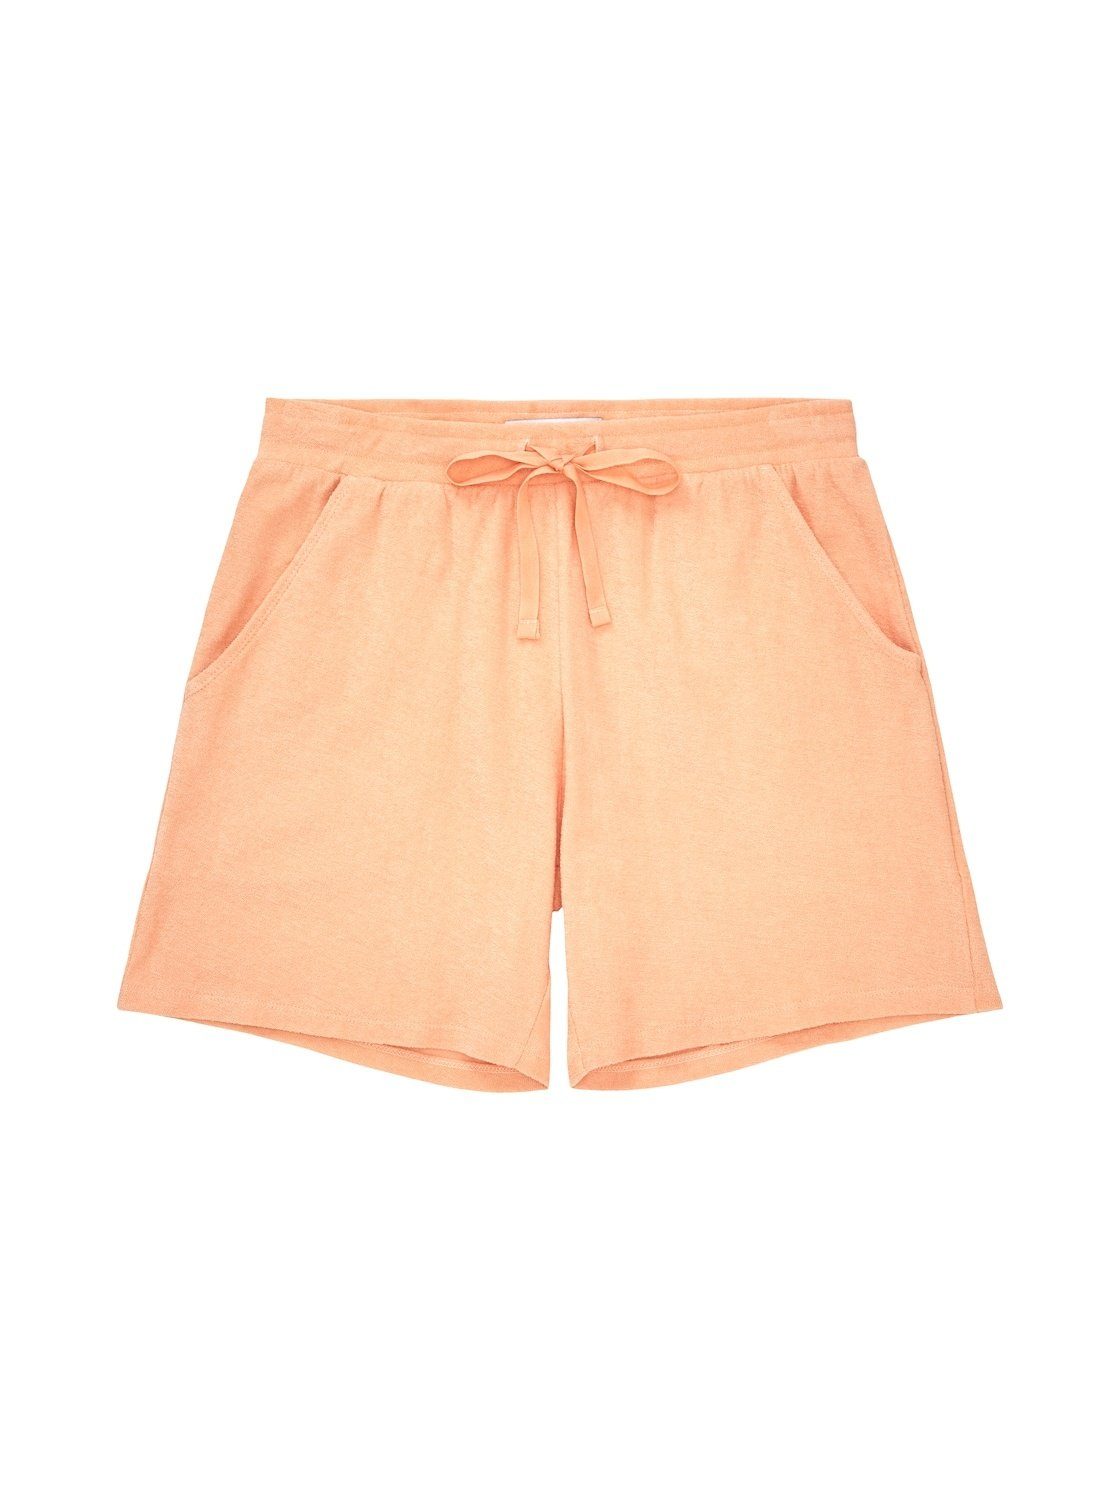 TAILOR Frottee Schlafshorts TOM Shorts